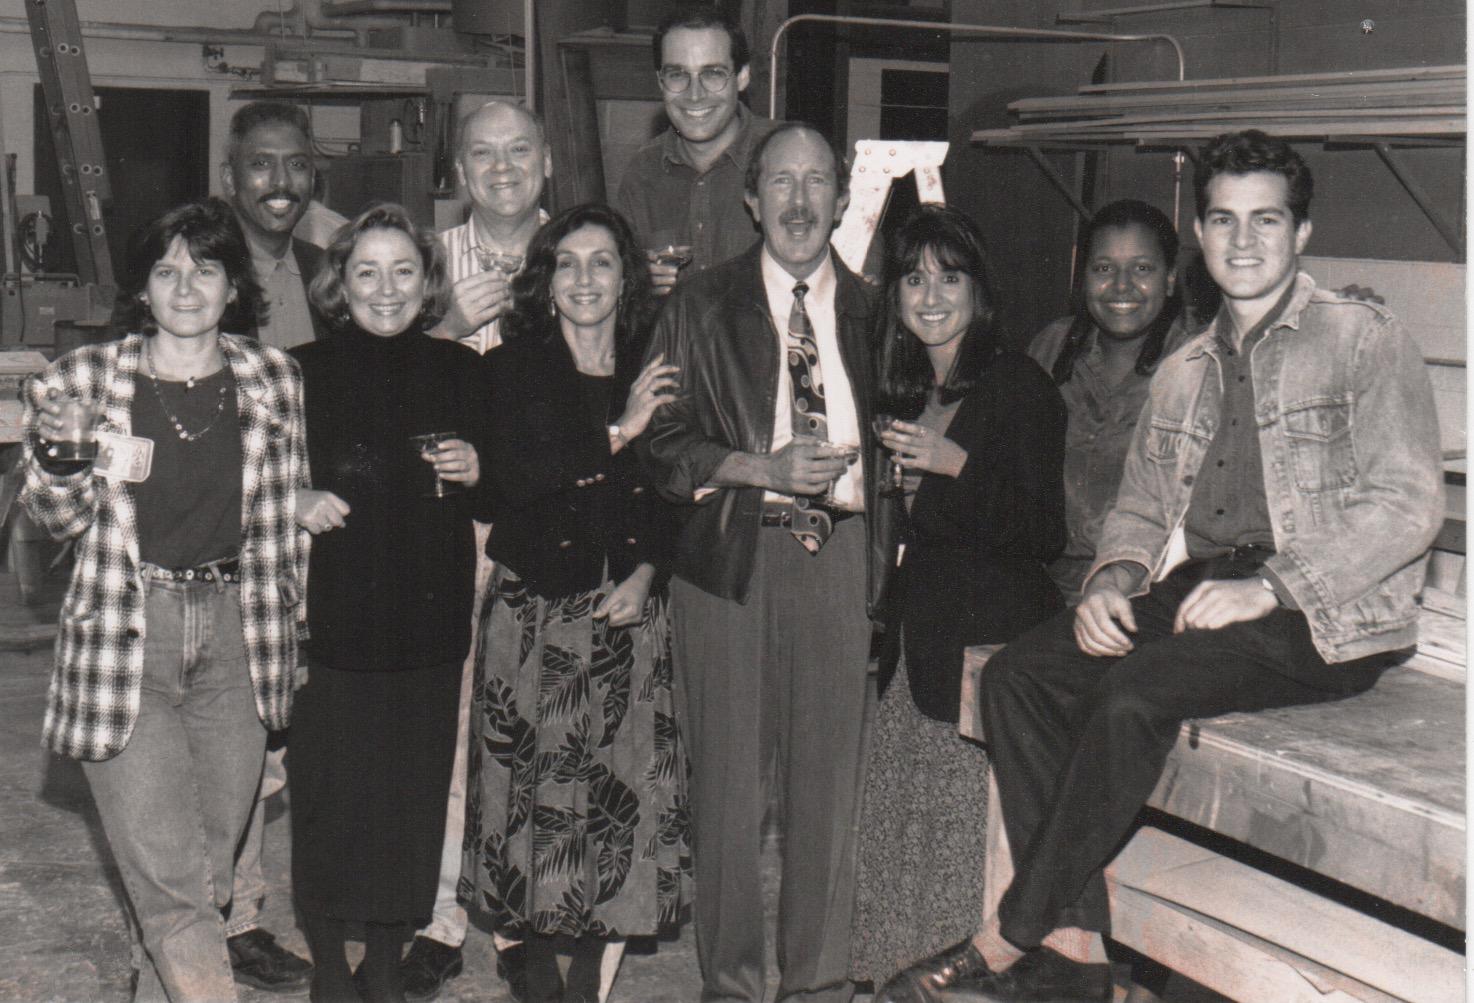 Glenn DuBose’s last day at WTTW in 1994. Front row from left: Jamie Ceaser, Kate MacMillin, Fawn Ring, Glenn DuBose, Nicolette Ferri, Lydia Norwood and Marc Vitali. Back row from left: Michael McAlpin, James Arntz and Geoffrey Baer. (Courtesy of Marc Vitali)